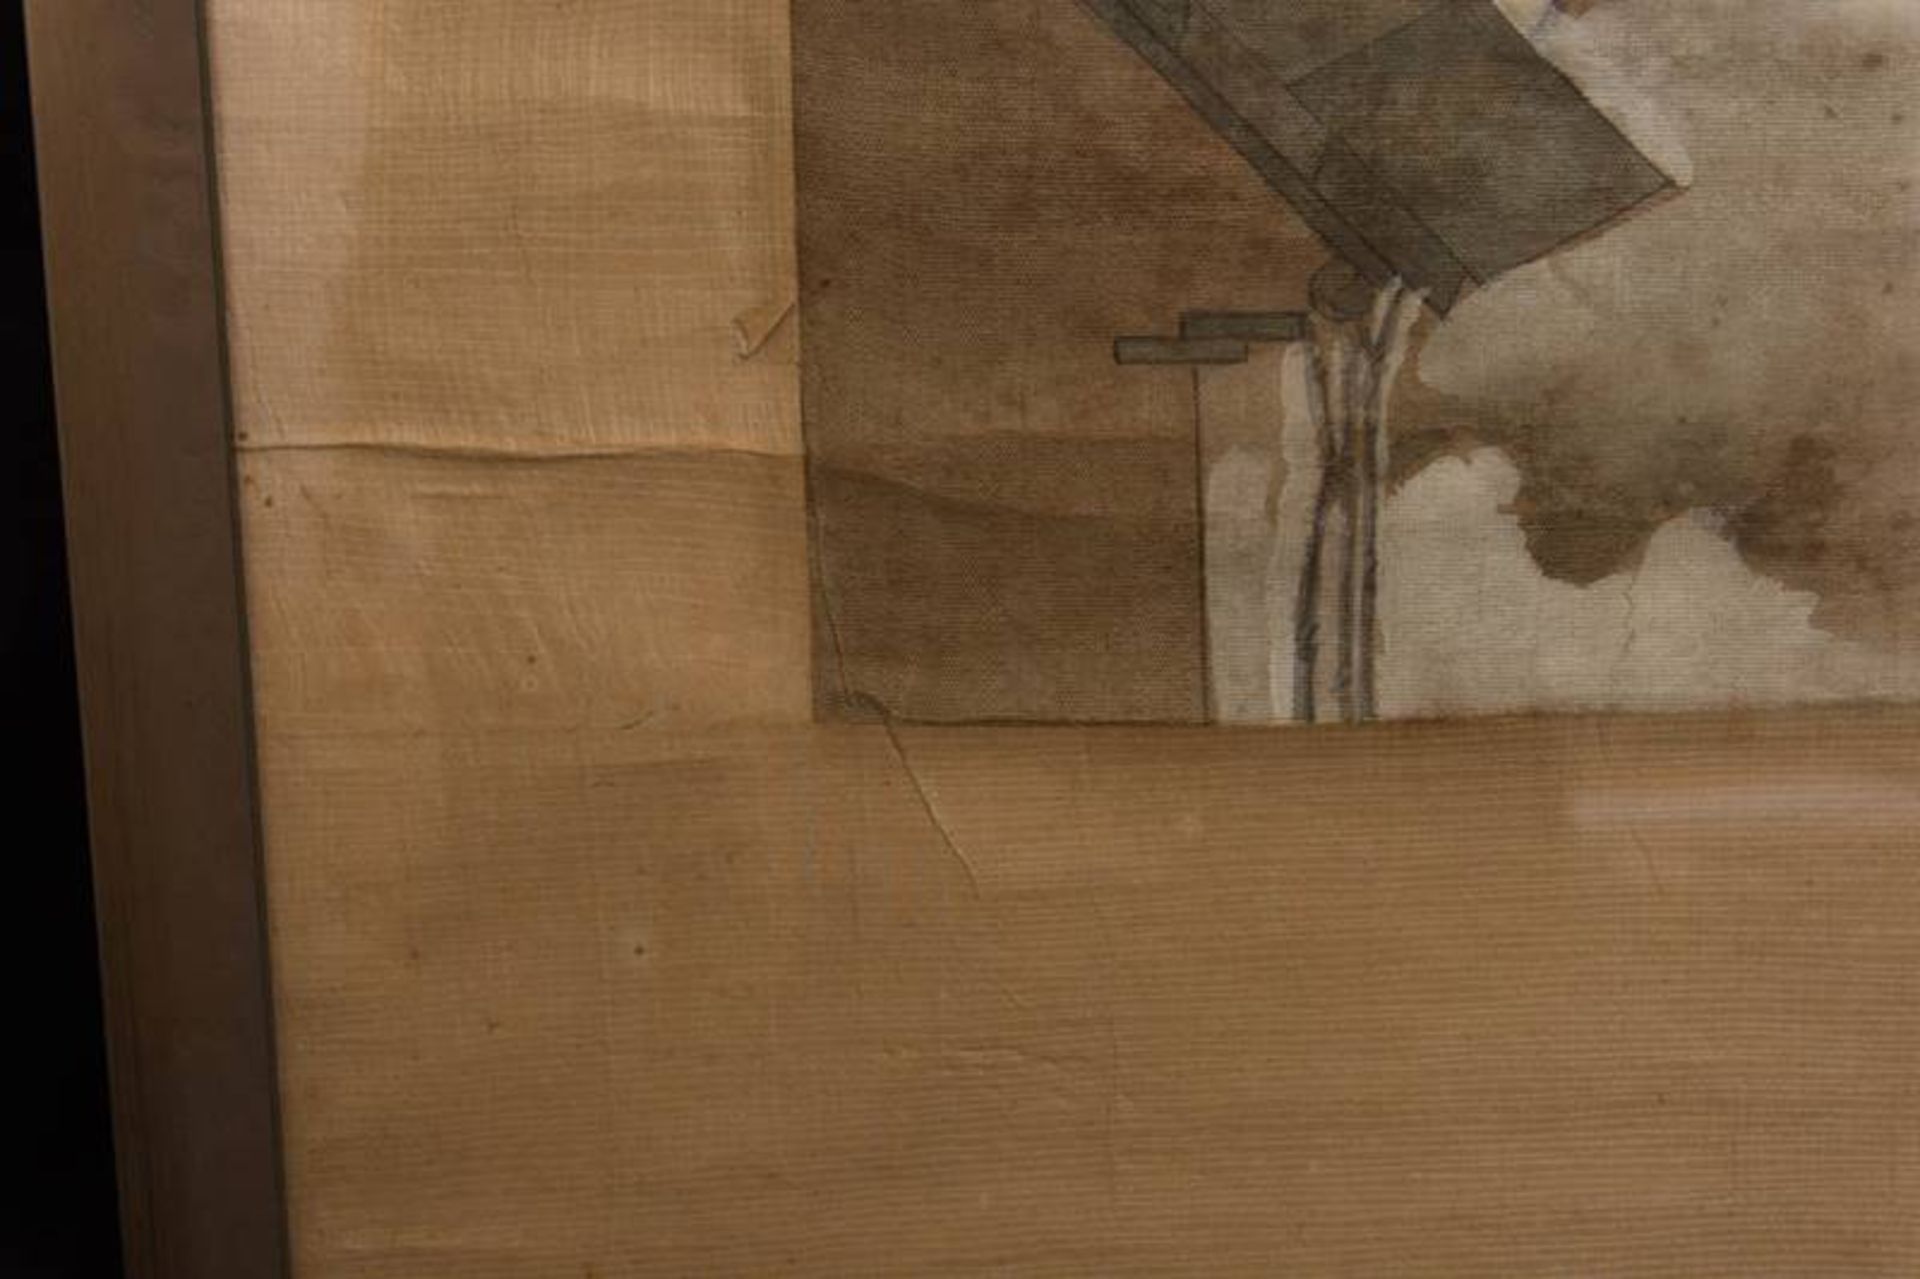 Japanese scroll painting - Image 6 of 8